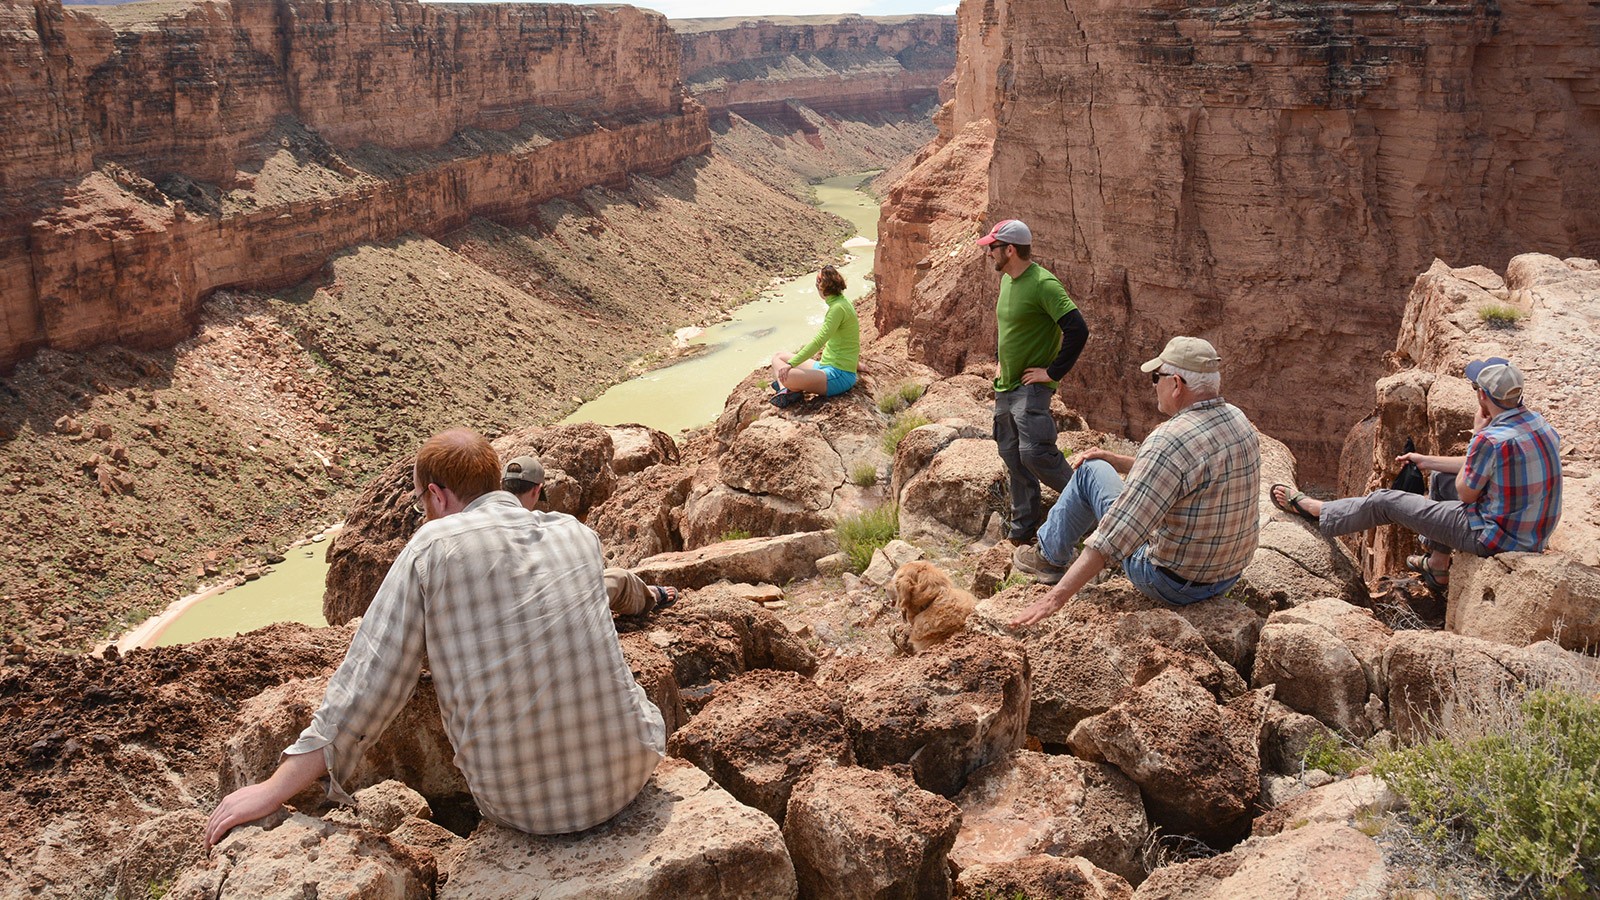 Jack Schmidt and his team sit on an overlook on the Colorado River.